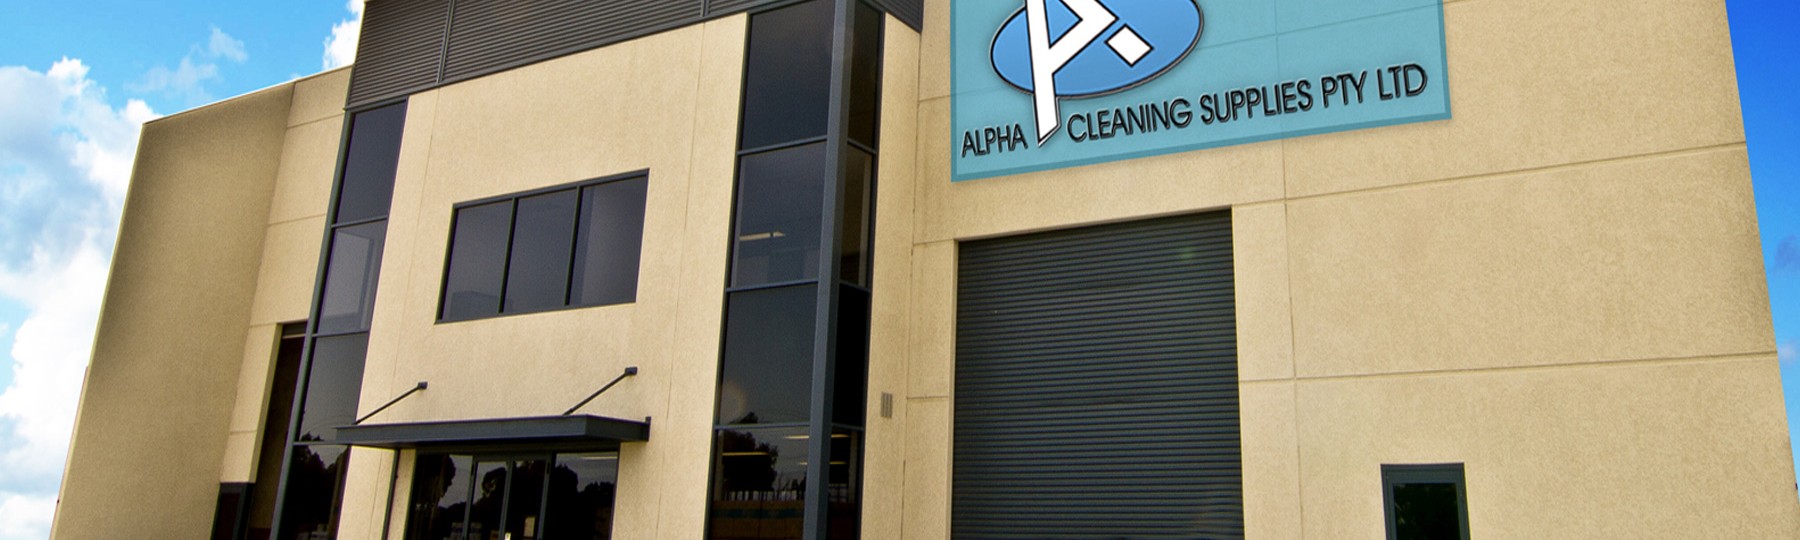 Commercial Cleaning Supplies In Perth